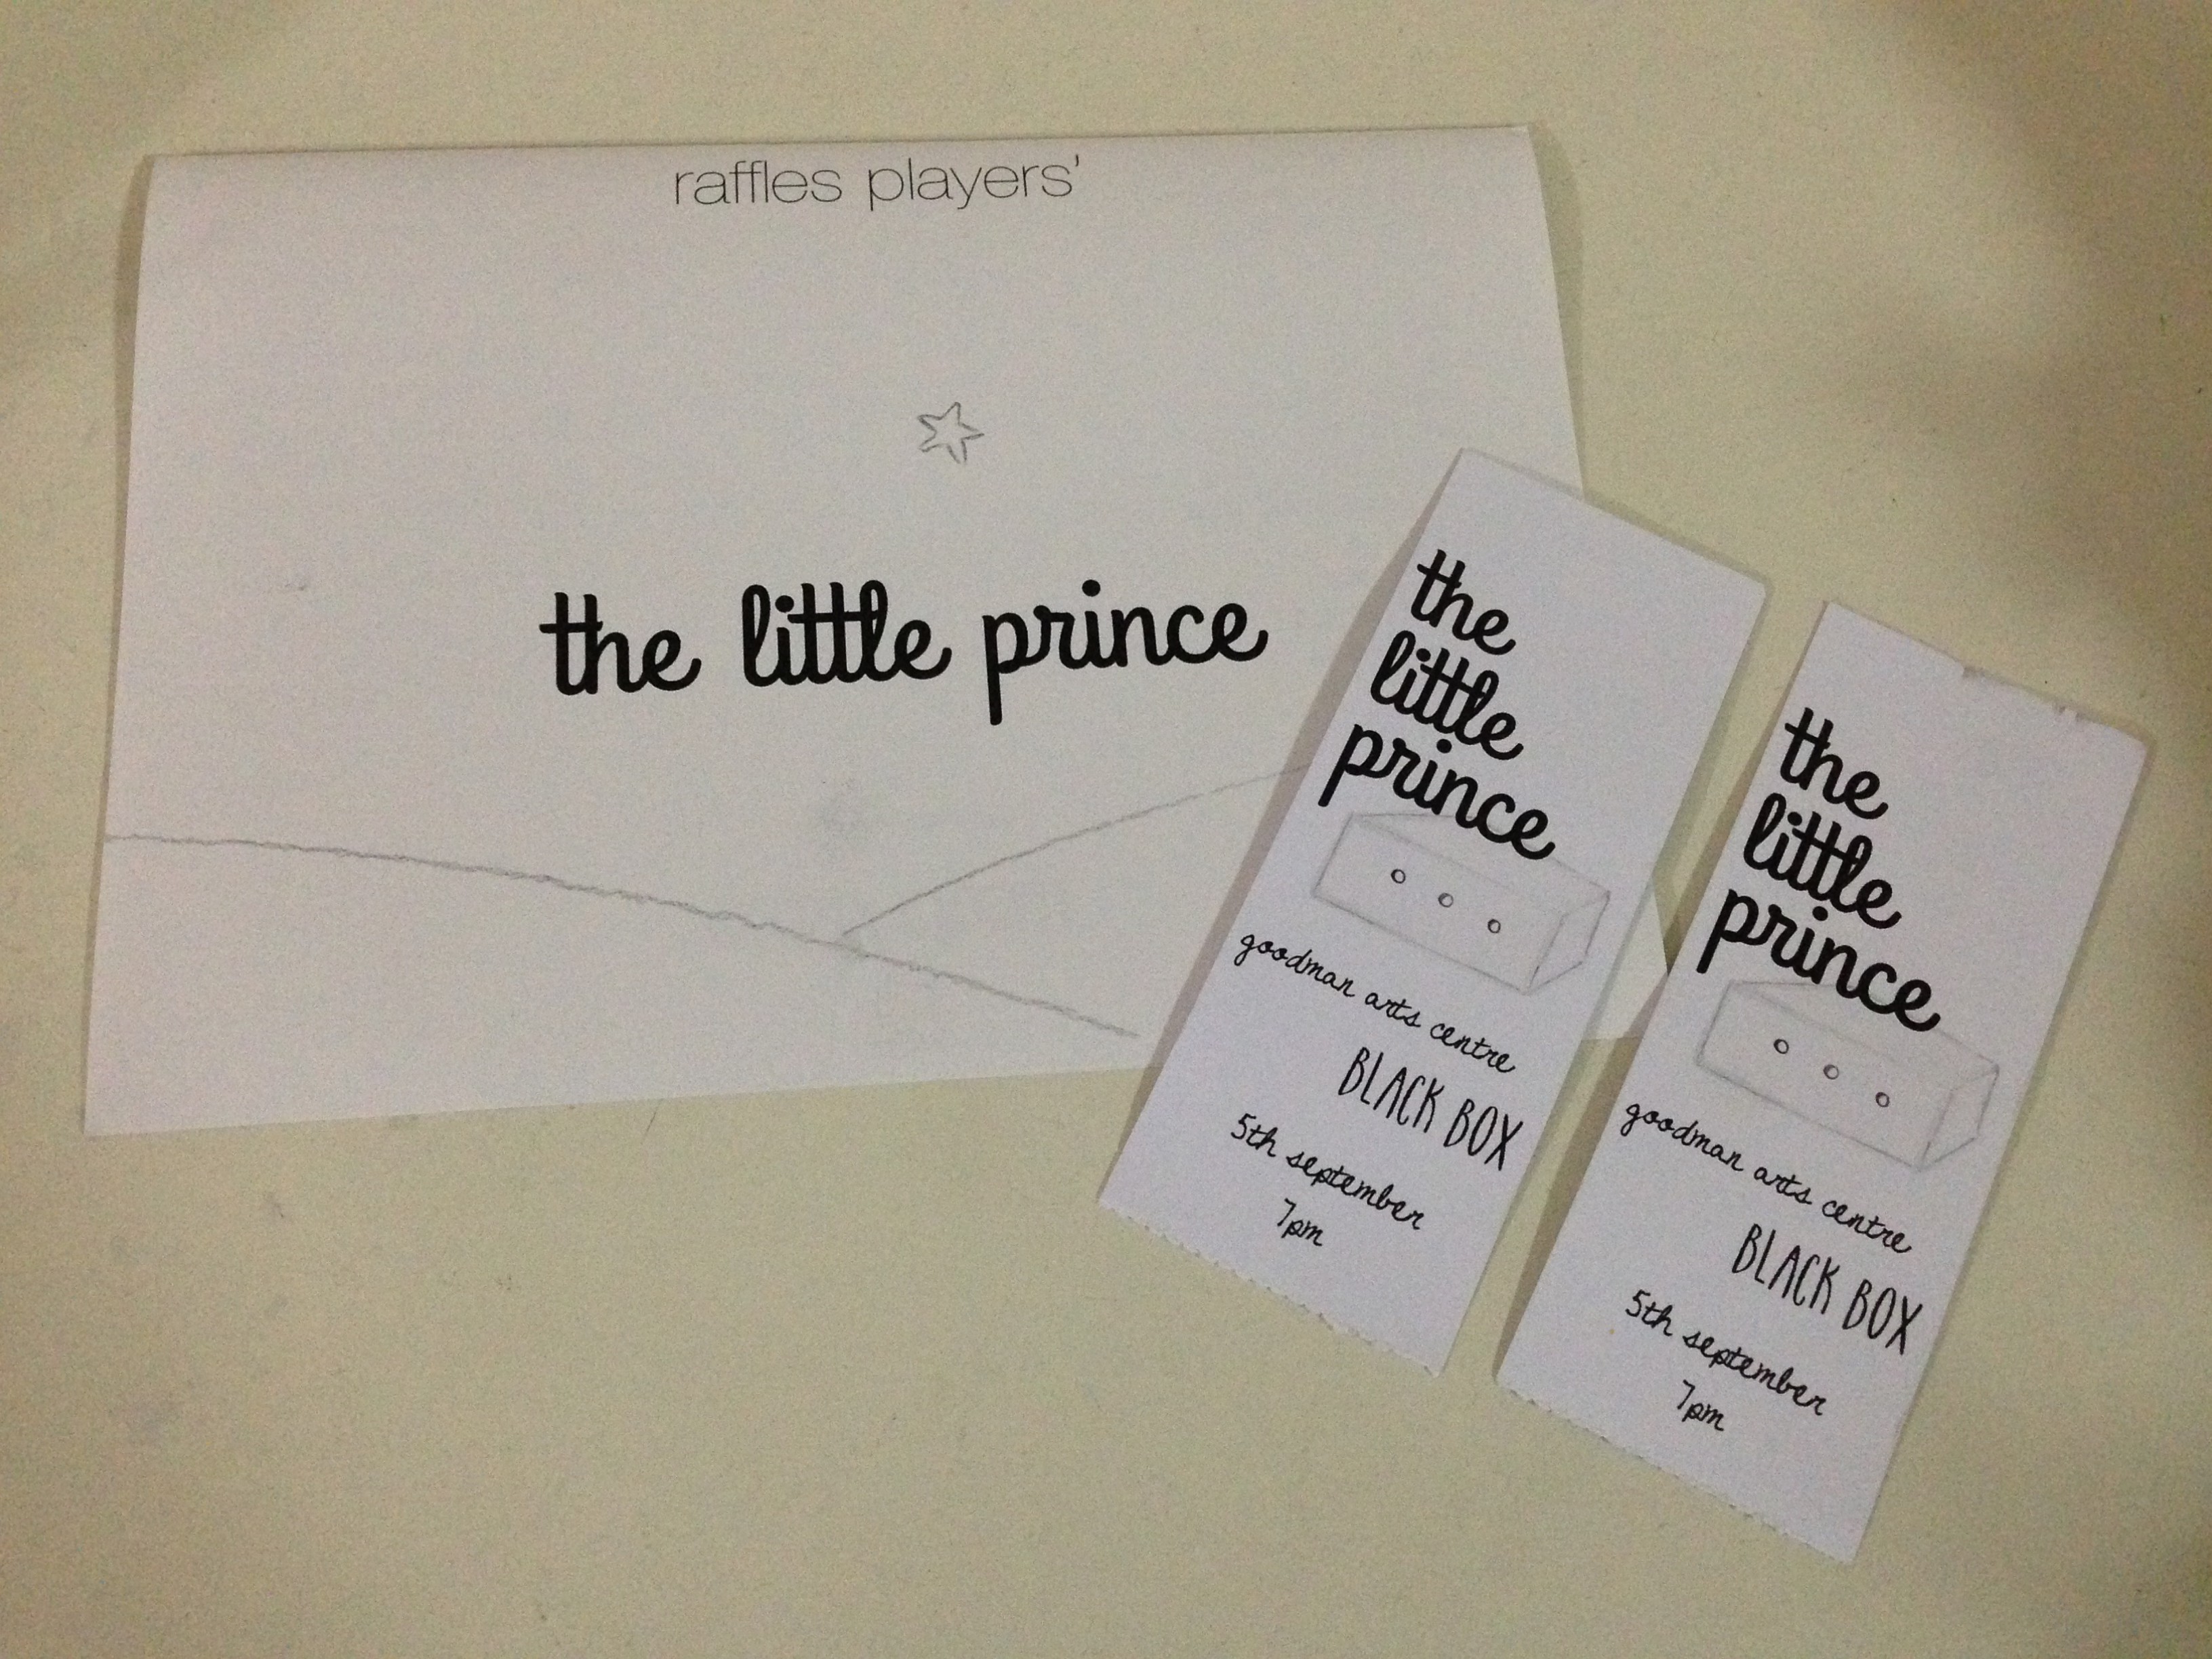 Tickets and Programme Booklet for "The Little Prince."